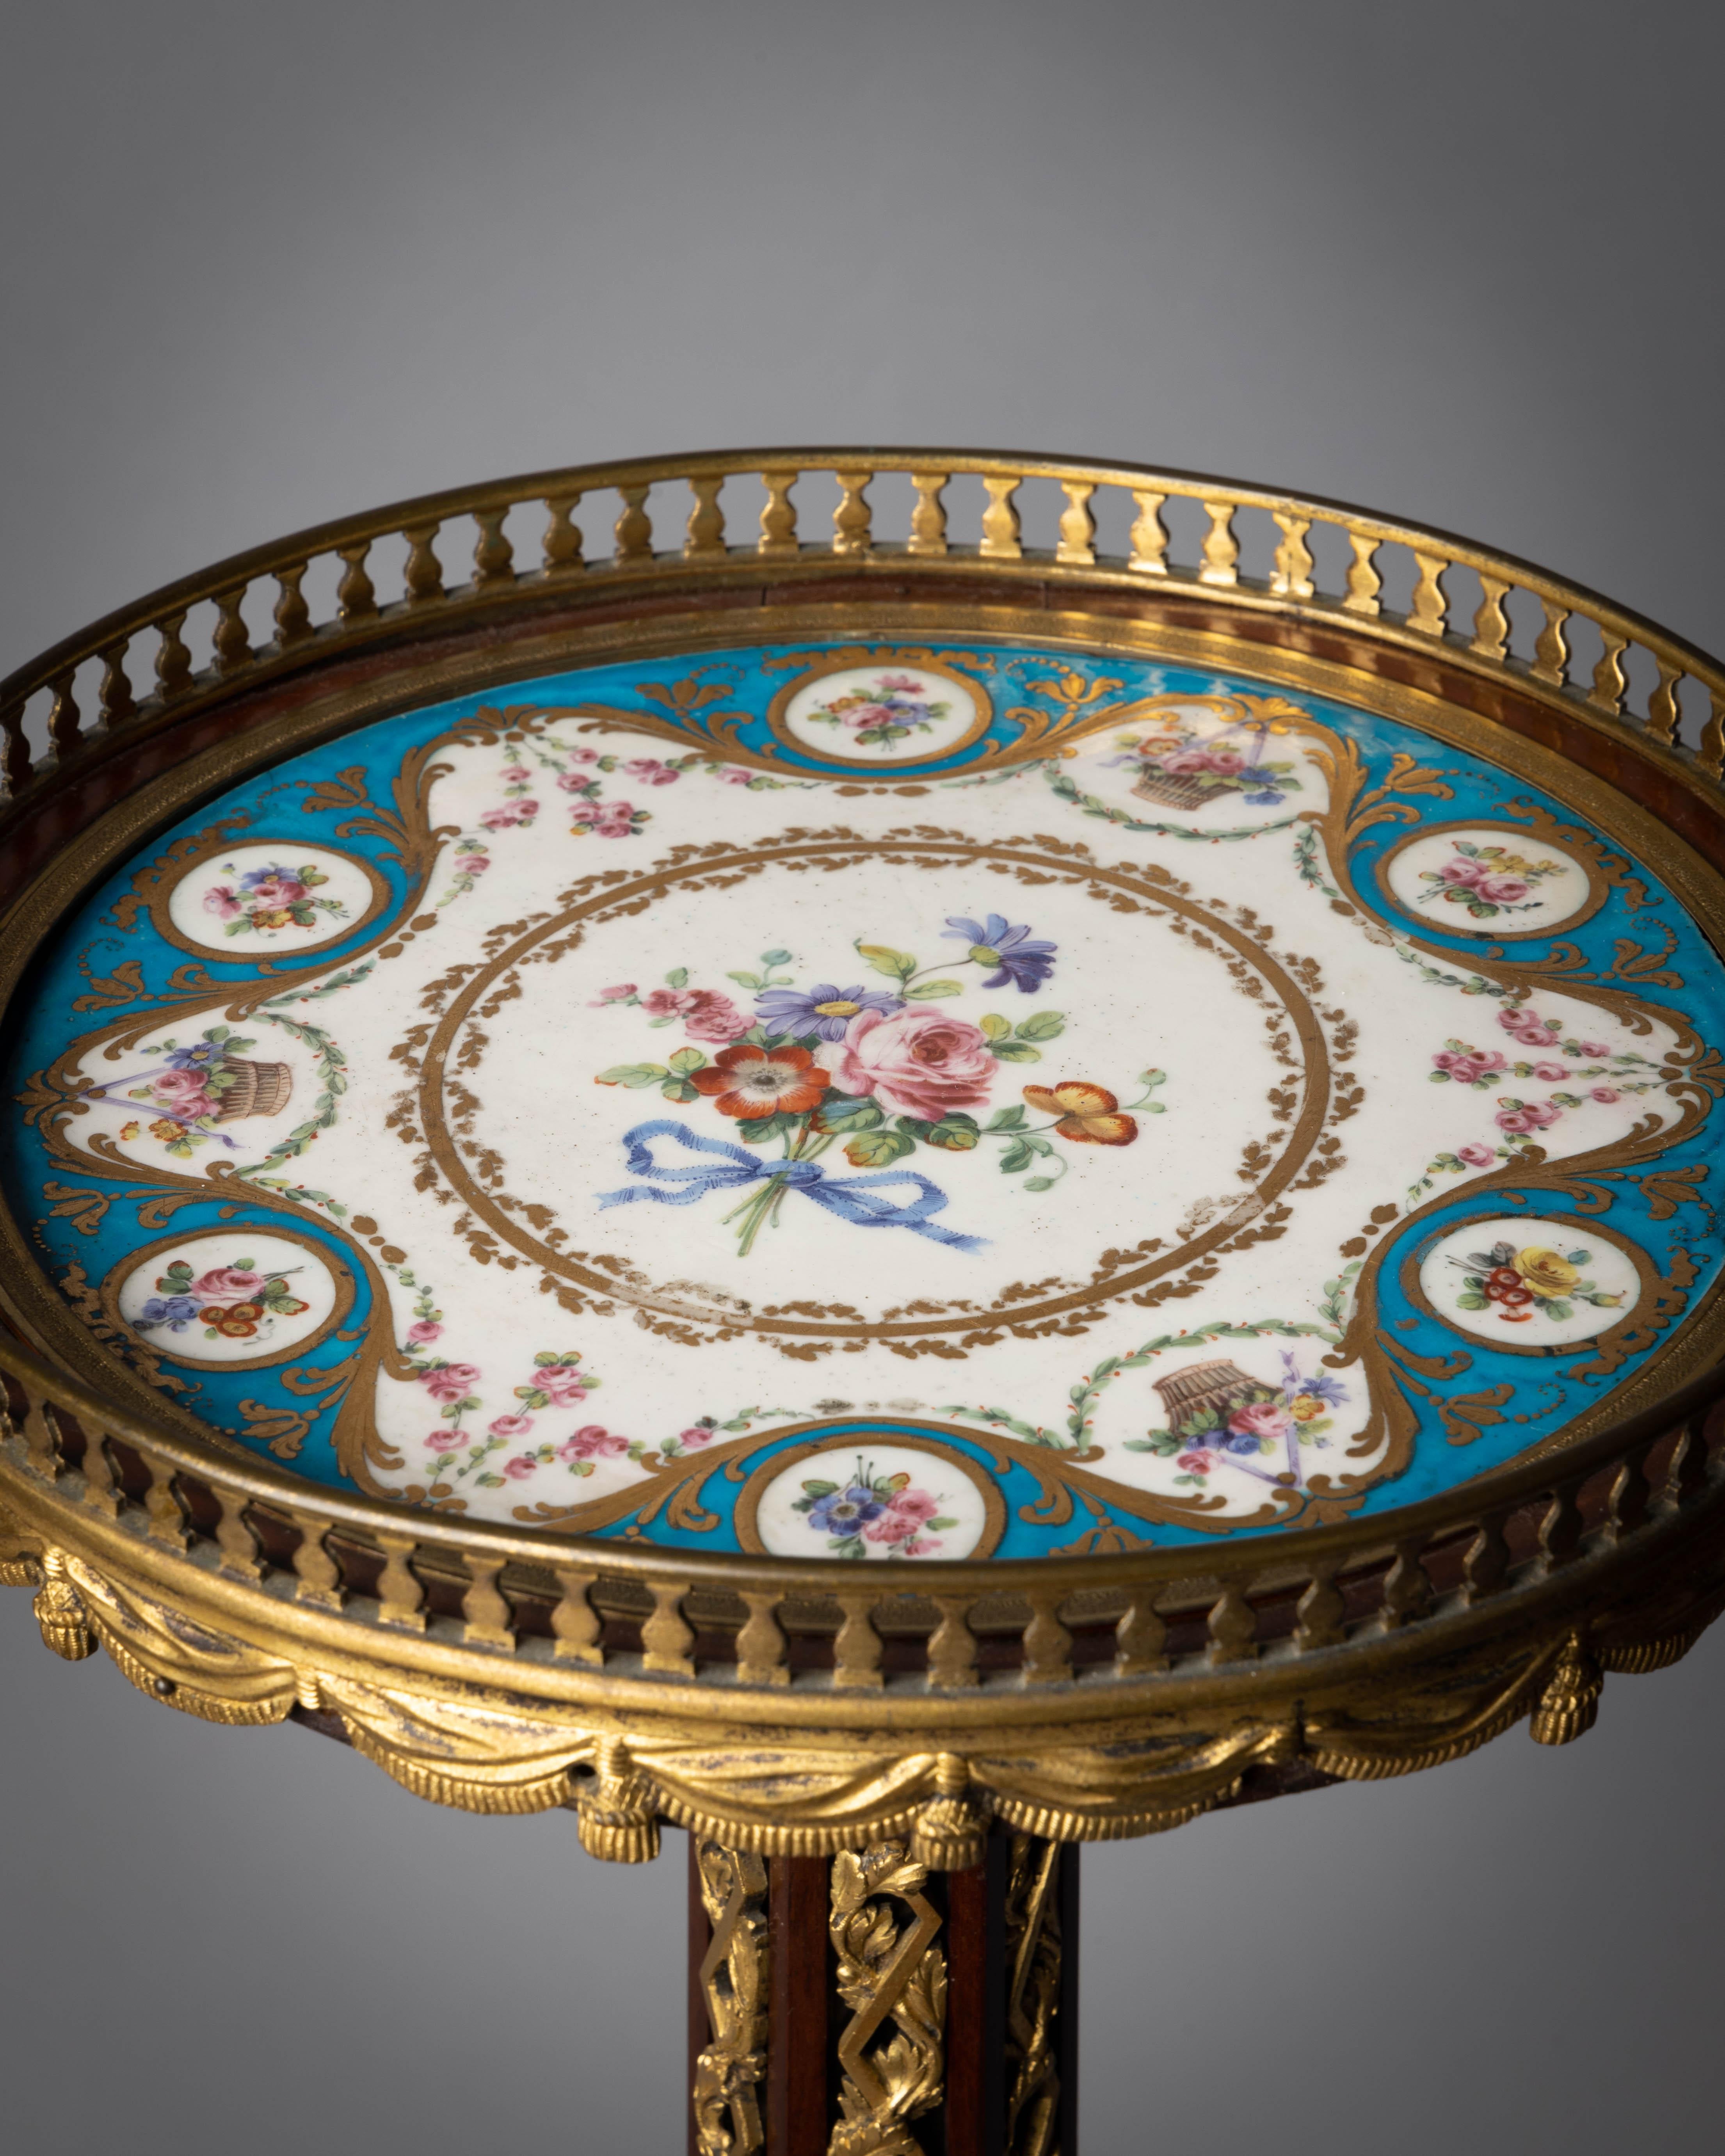 The hexagonal center support with applied and inset ormolu grape and vine guilloche raised on three gilt bronze mounted mahogany legs with acanthus leaves and segmented by gilt bronze paterae appliques, the cabriole legs with gilt bronze sabots.